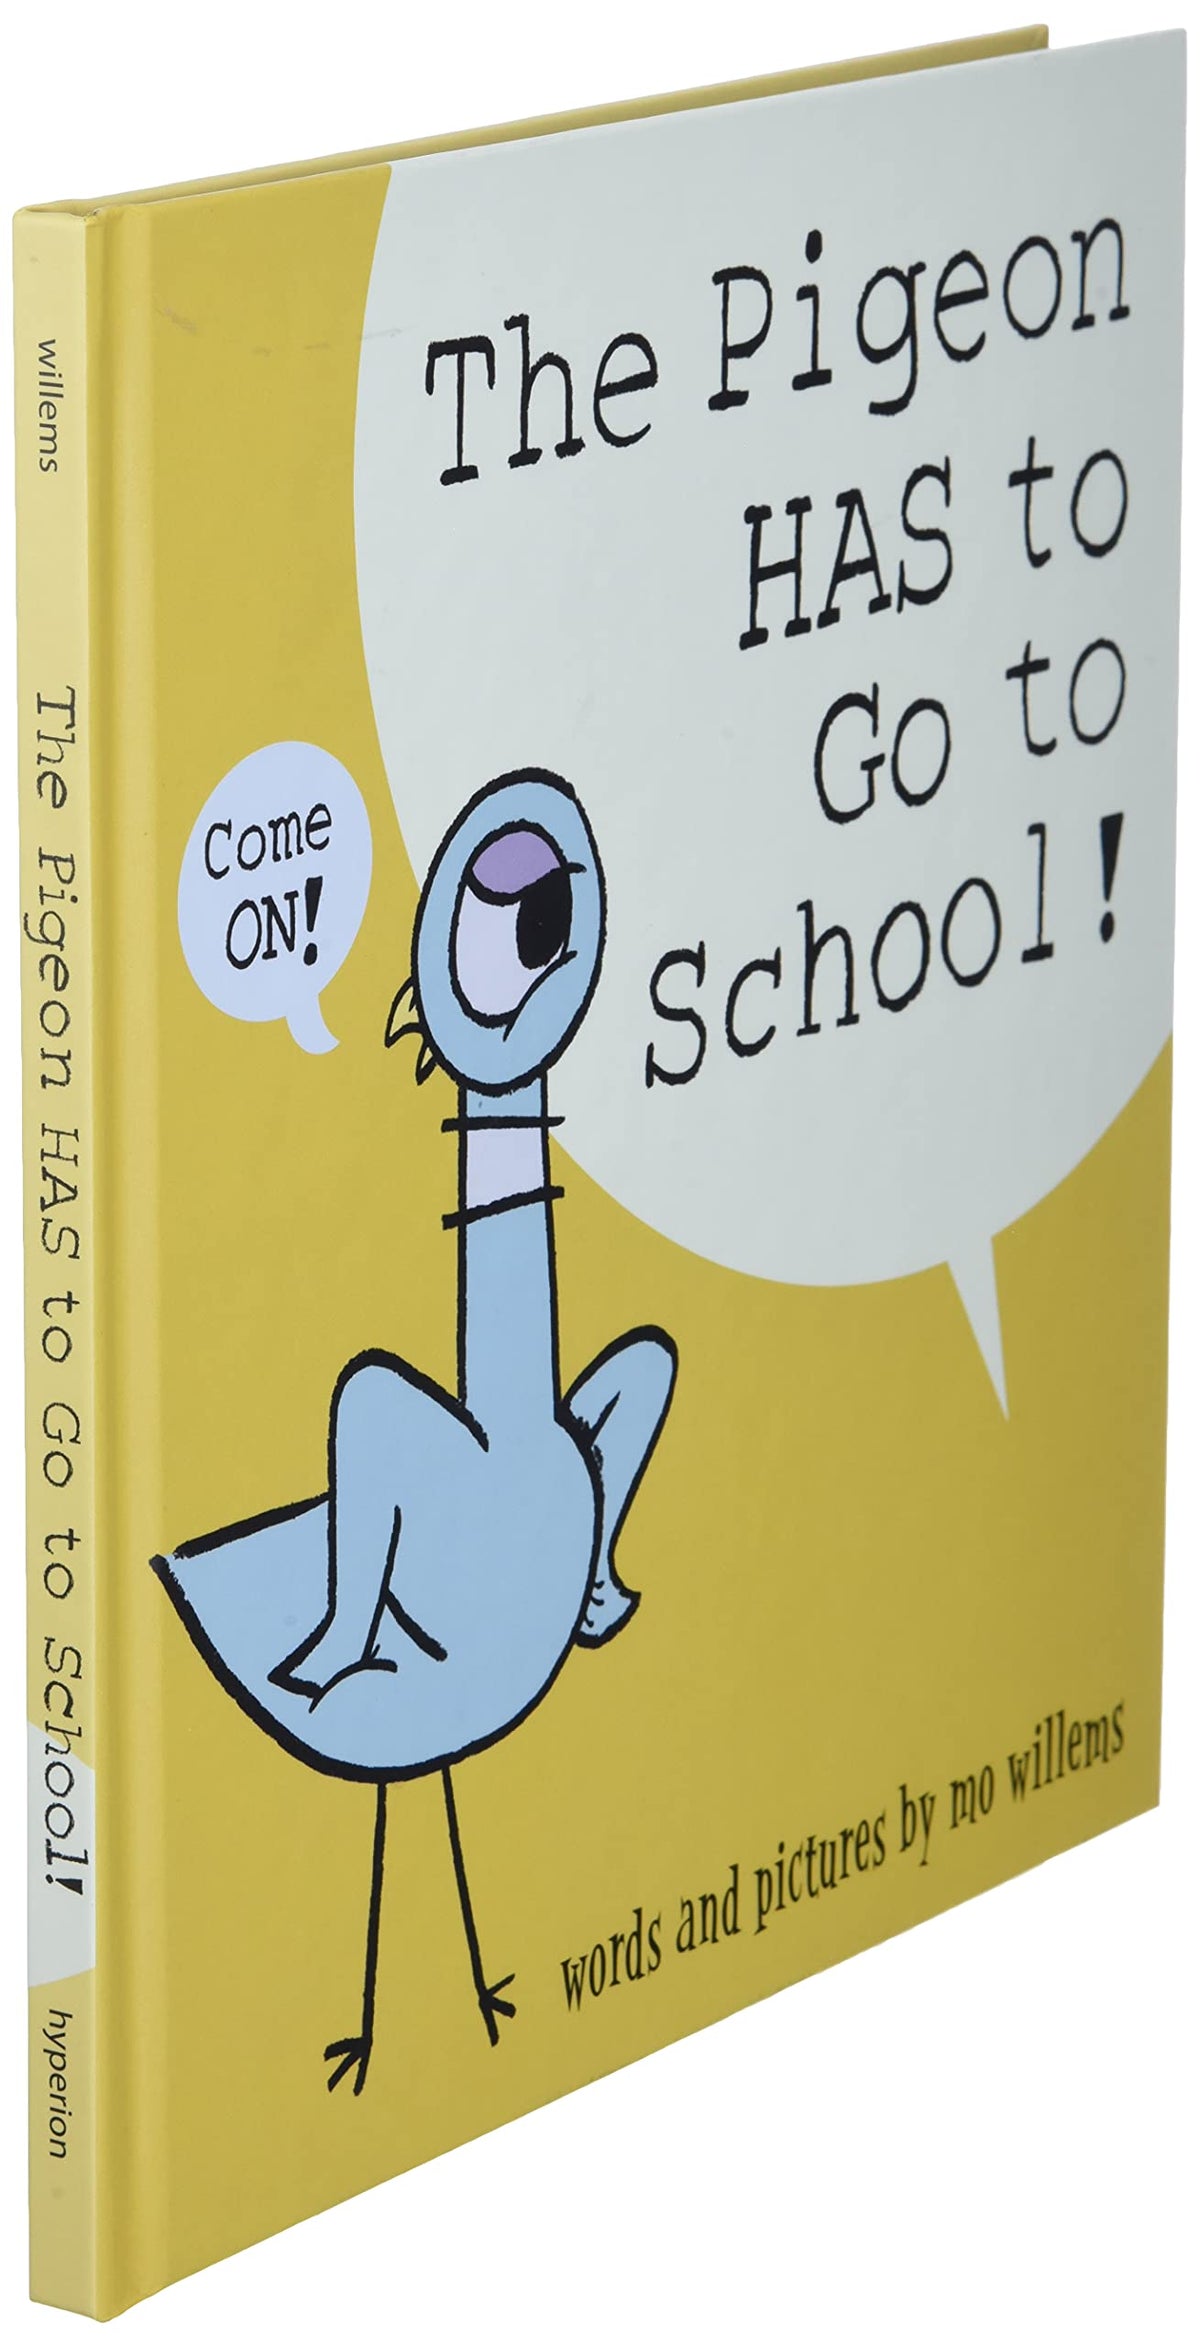 The Pigeon HAS to Go to School! Cover